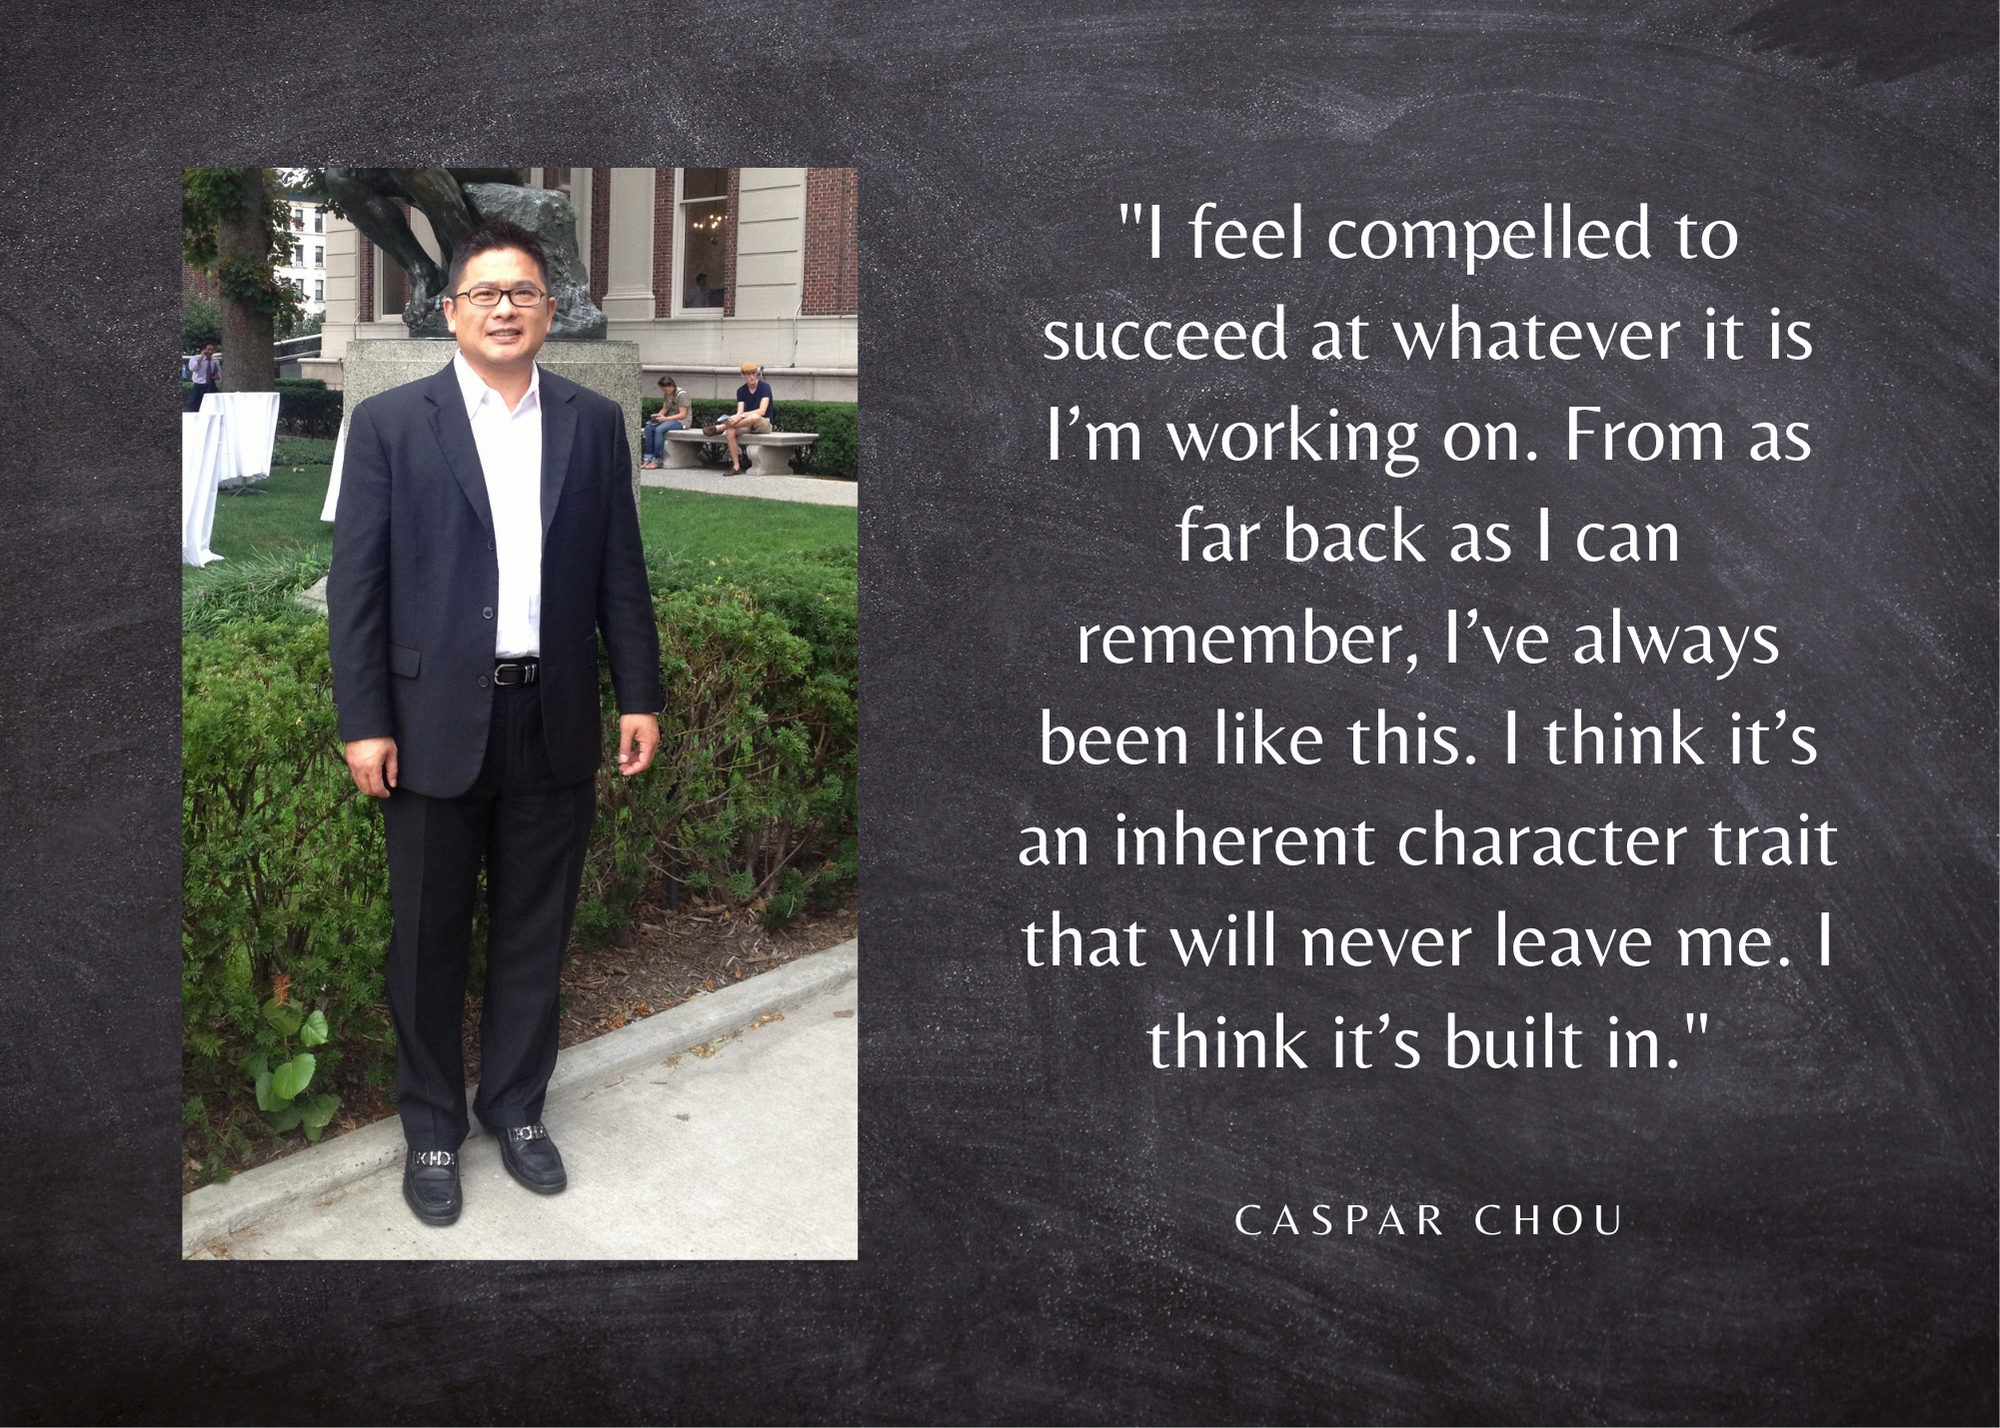 Caspar Chou is featured in a New Professional Profile